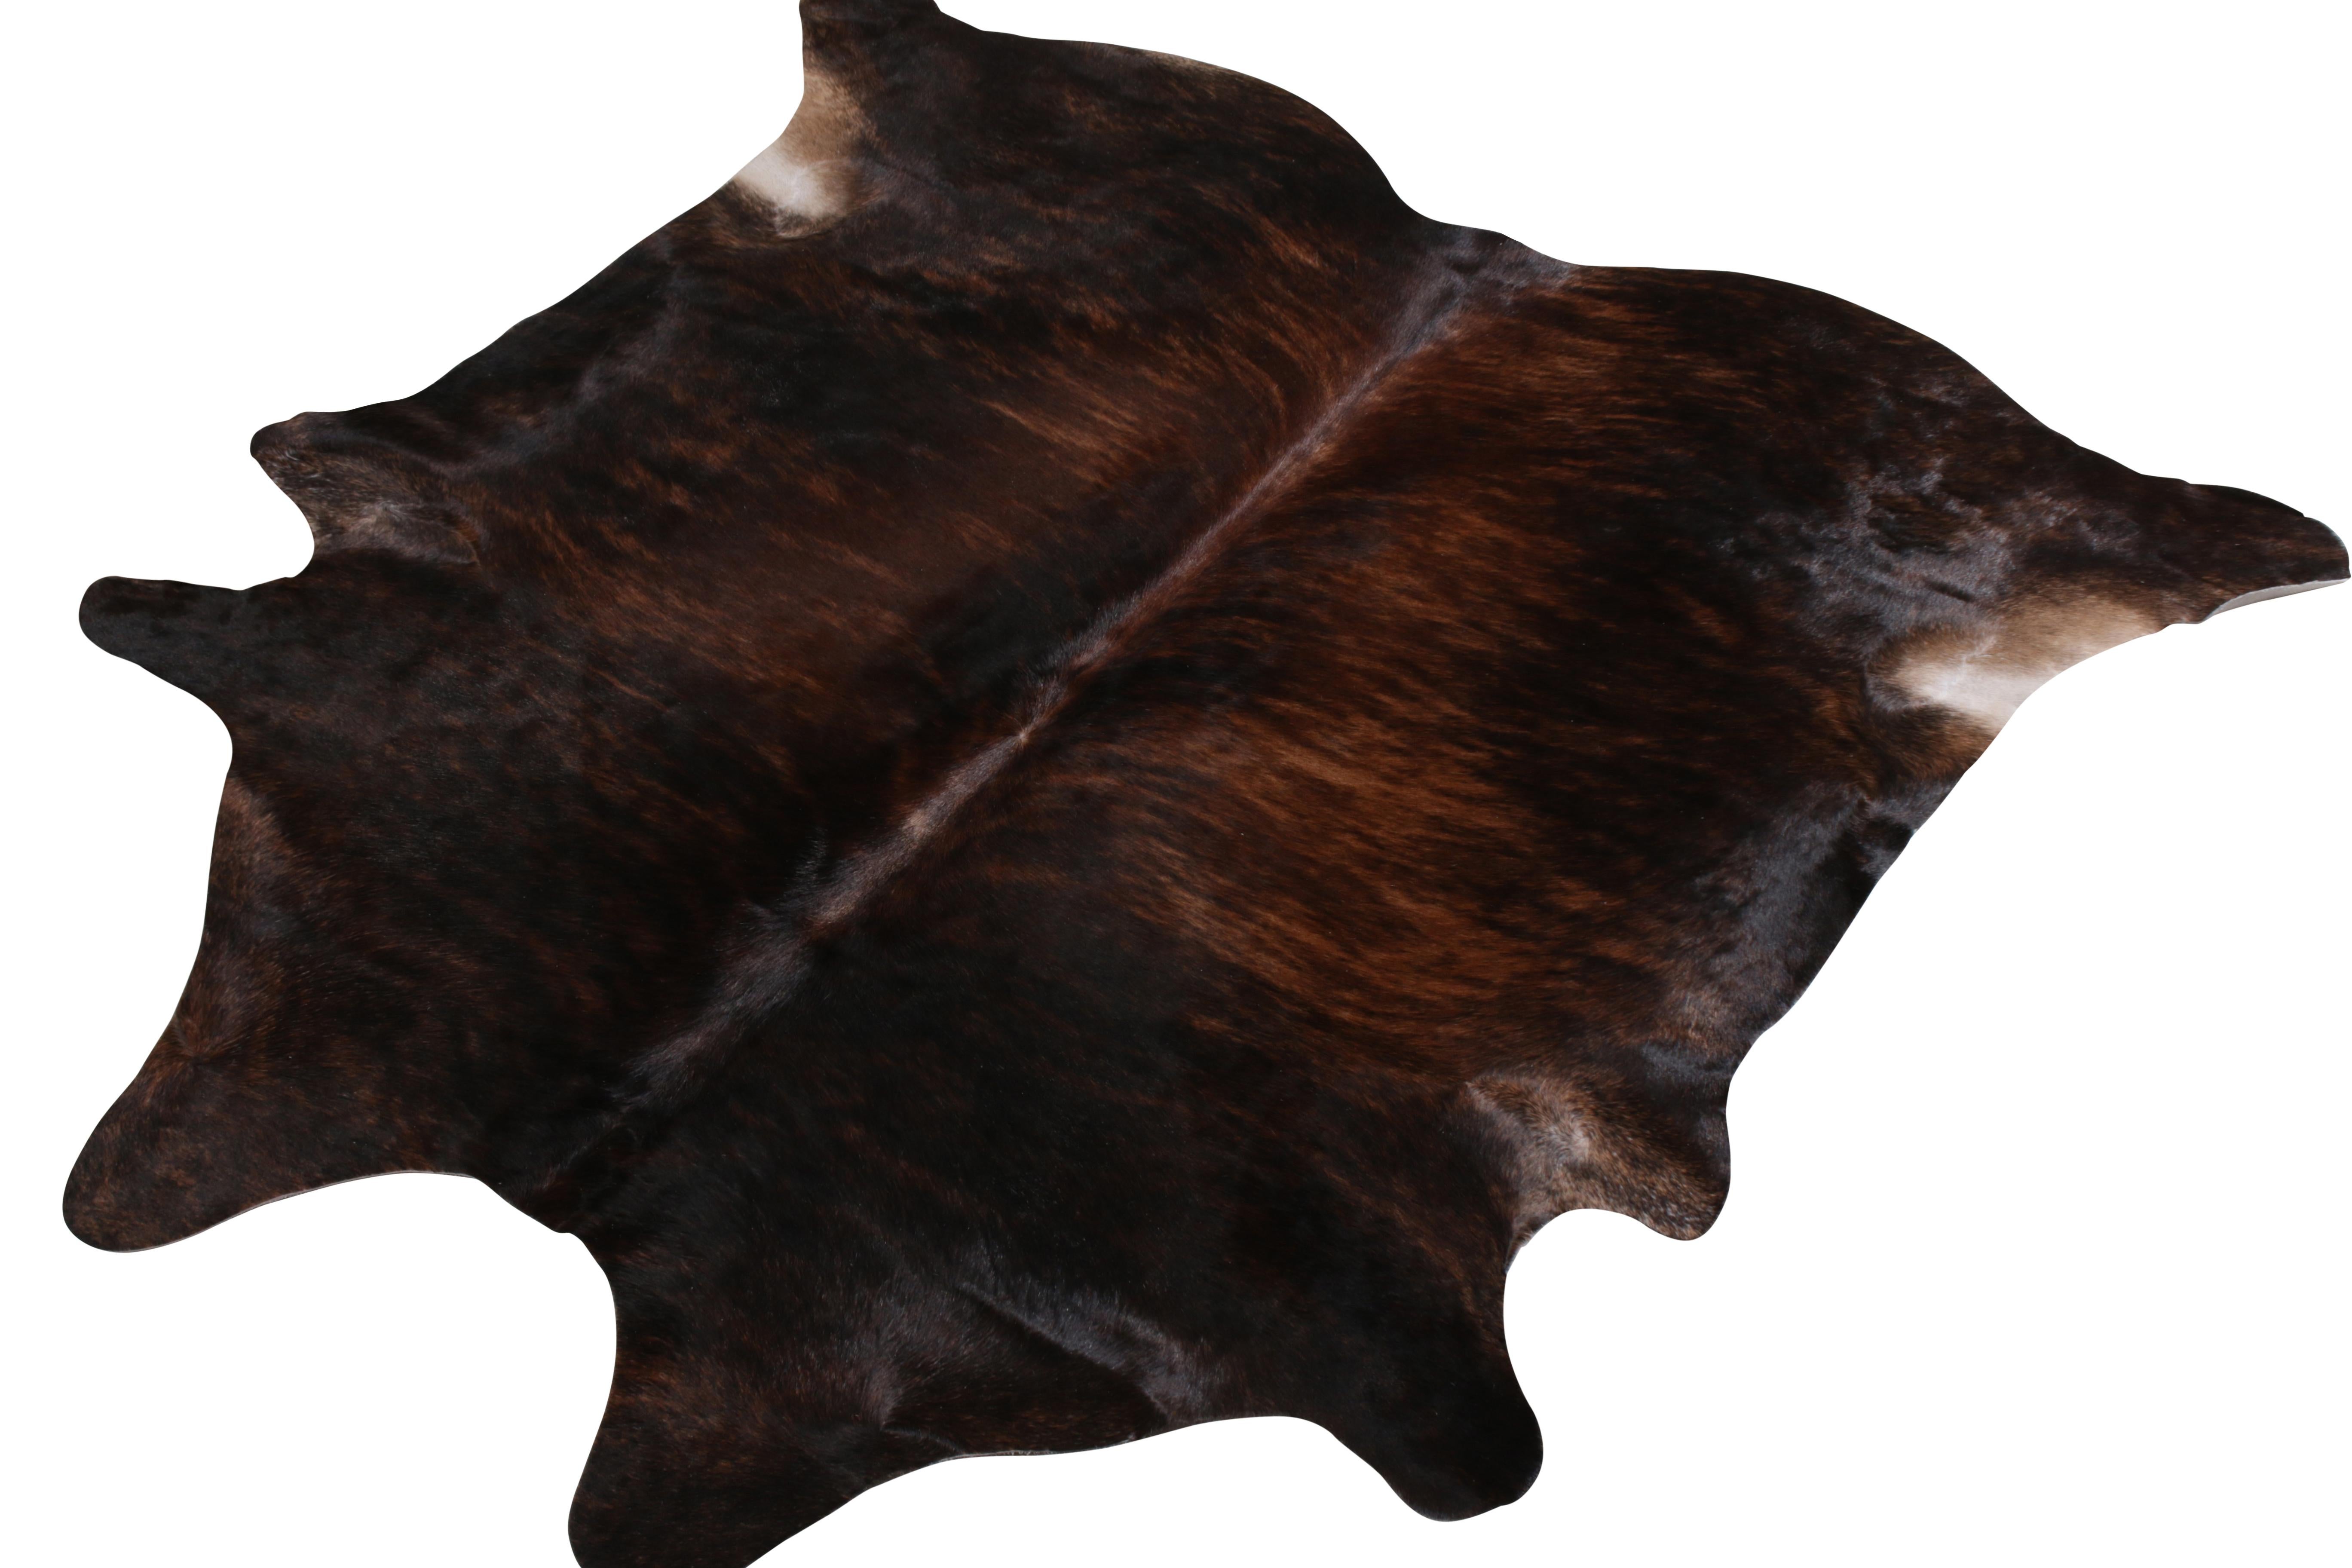 A 7 x 7 from Rug & Kilim’s line of handmade cowhide rugs. Enjoying a silky, lustrous sheen complementing rich beige-brown with black tones. A comfortable, textural choice, particularly well suited to country homes and rustic interiors.